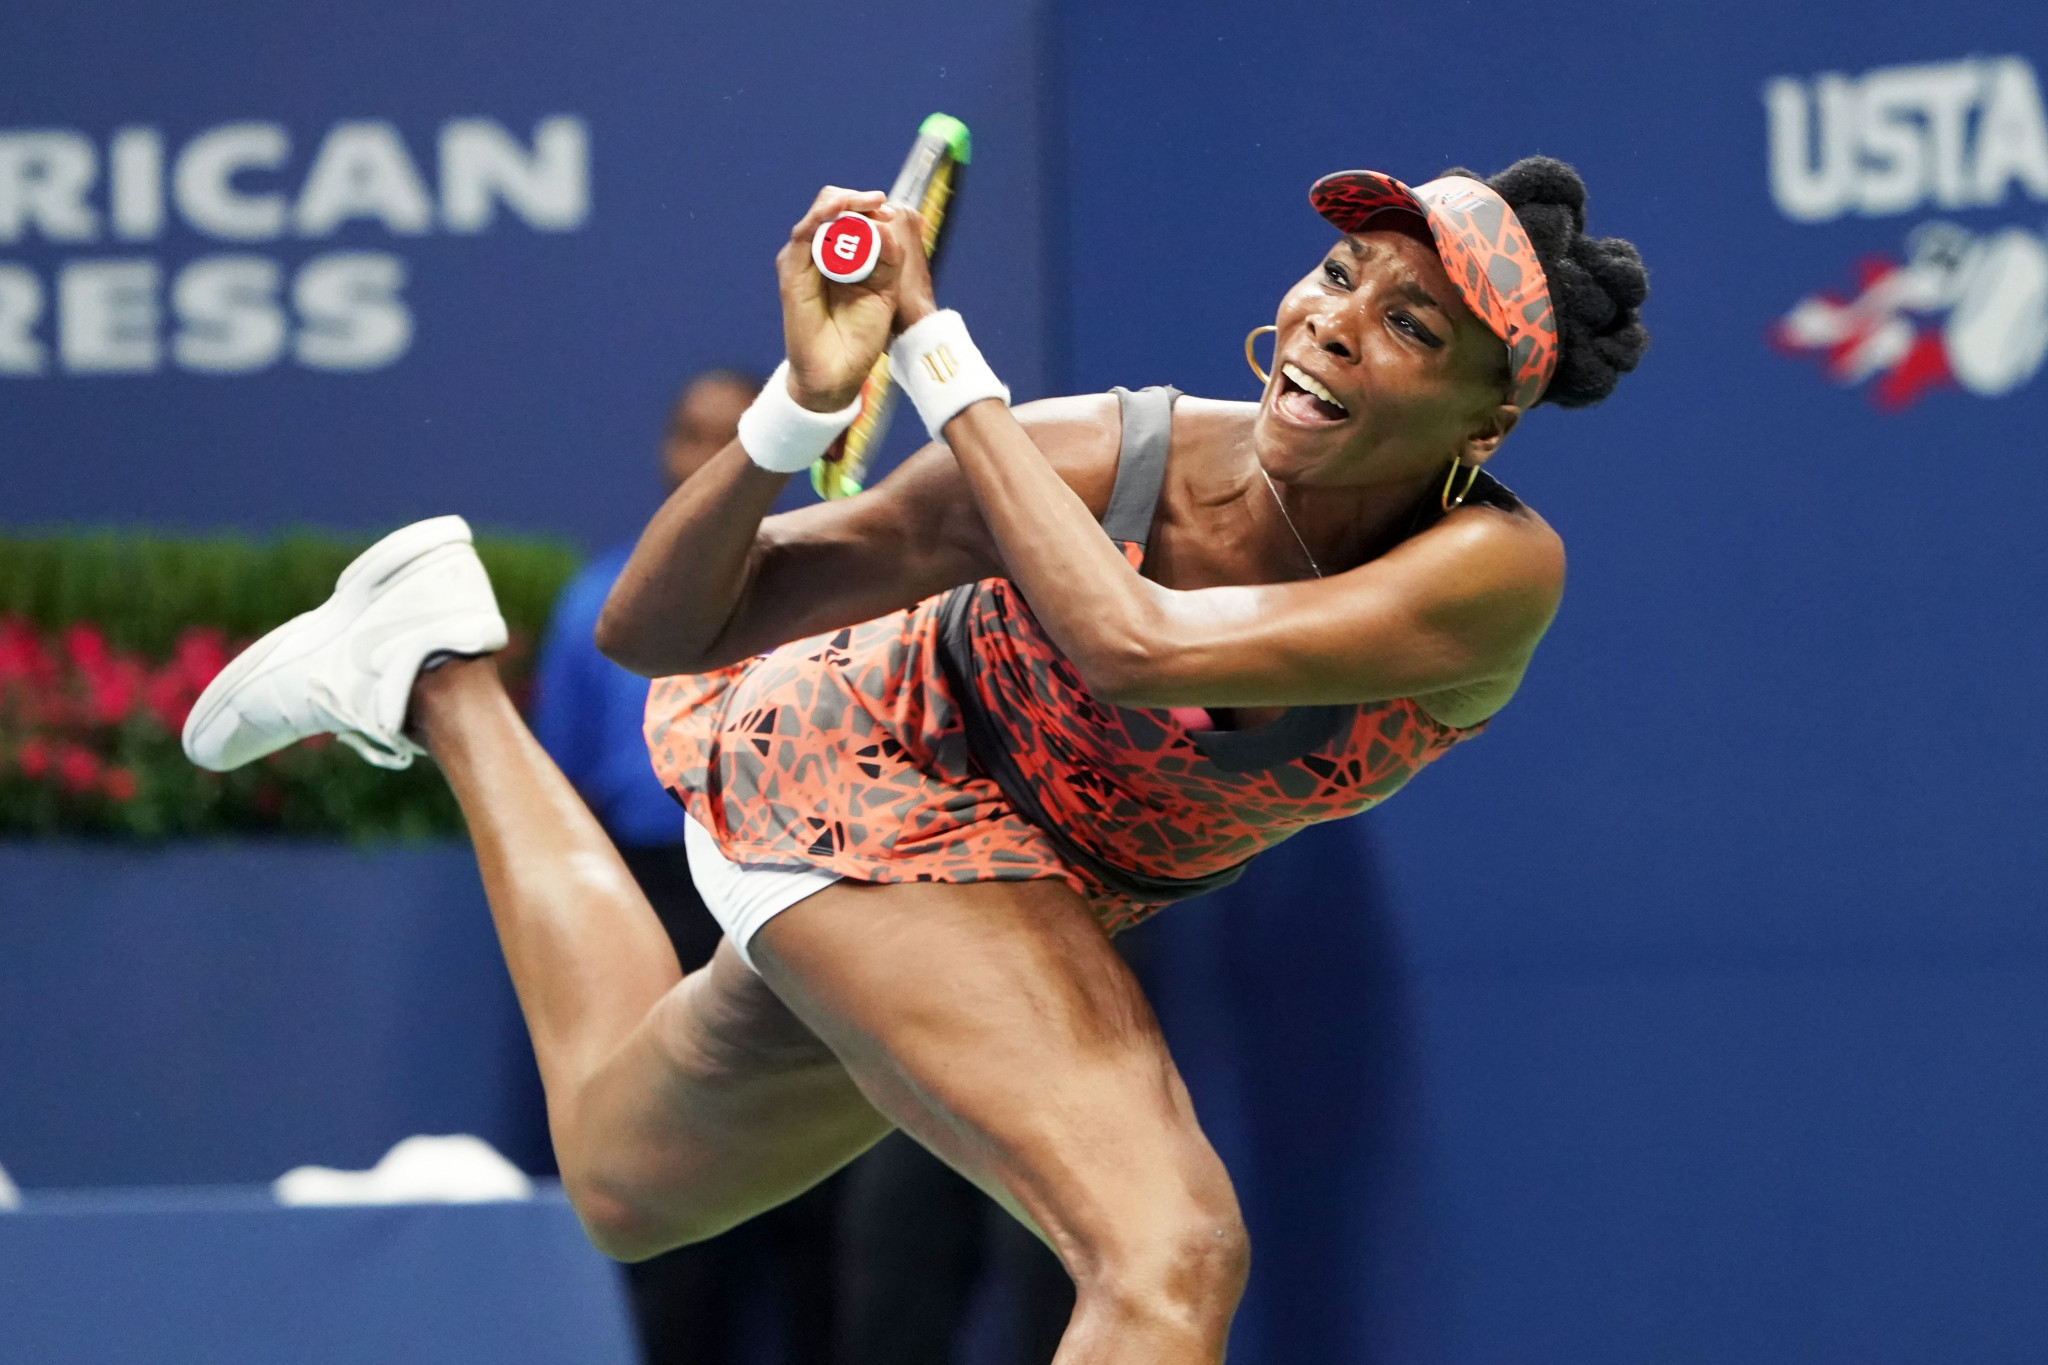 Venus Williams advanced to the semi-finals of the US Open after a third set tie-break ©Getty Images